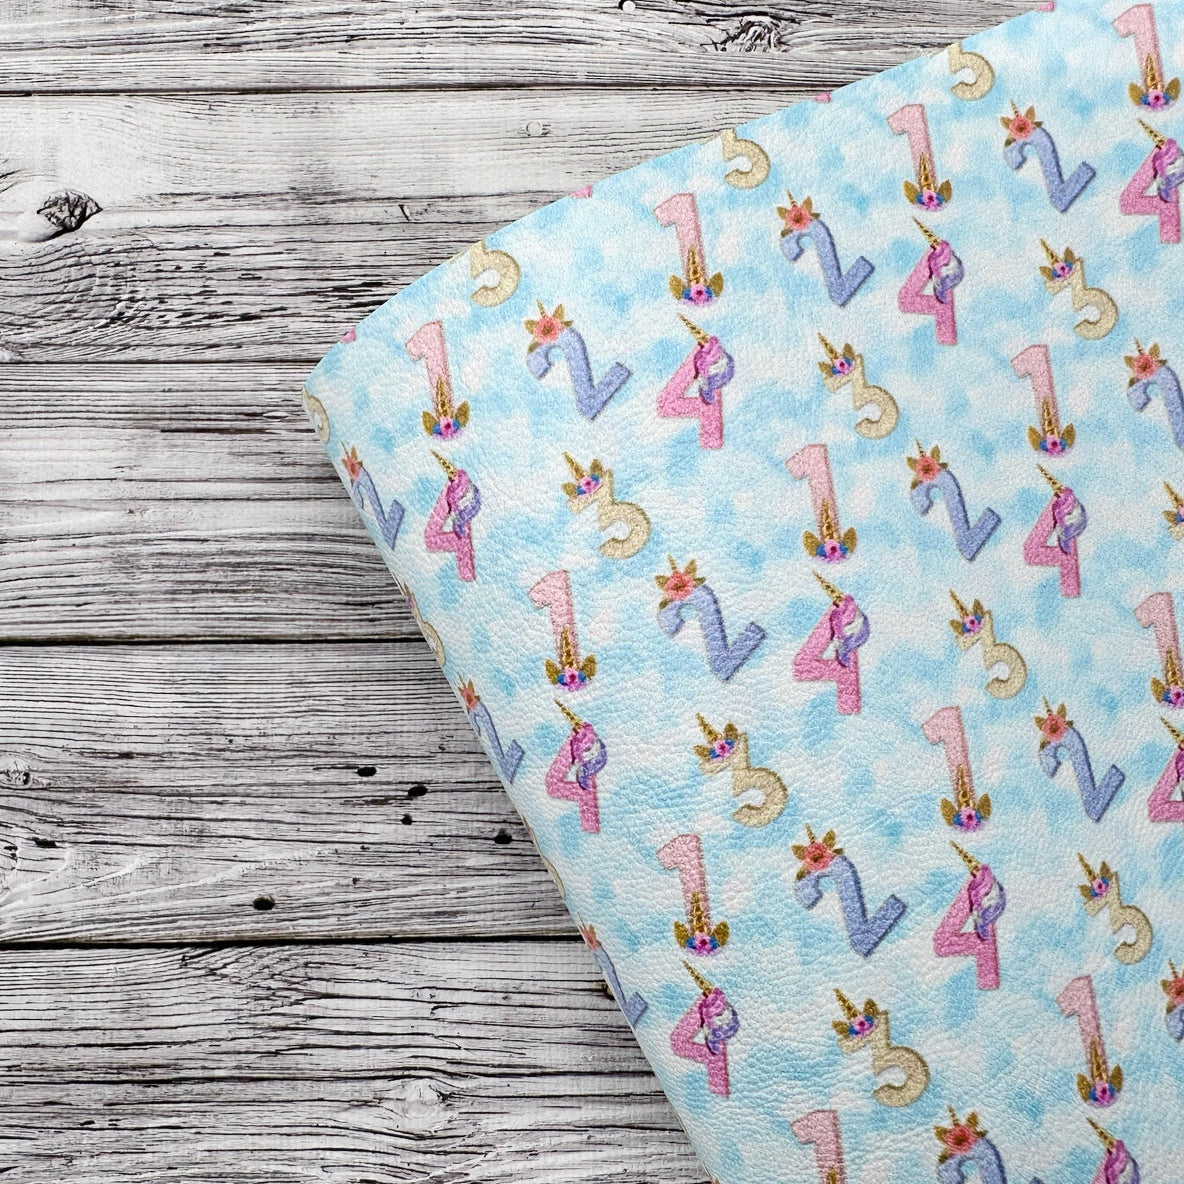 Unicorn Numbers Premium Faux Leather Fabric Sheets